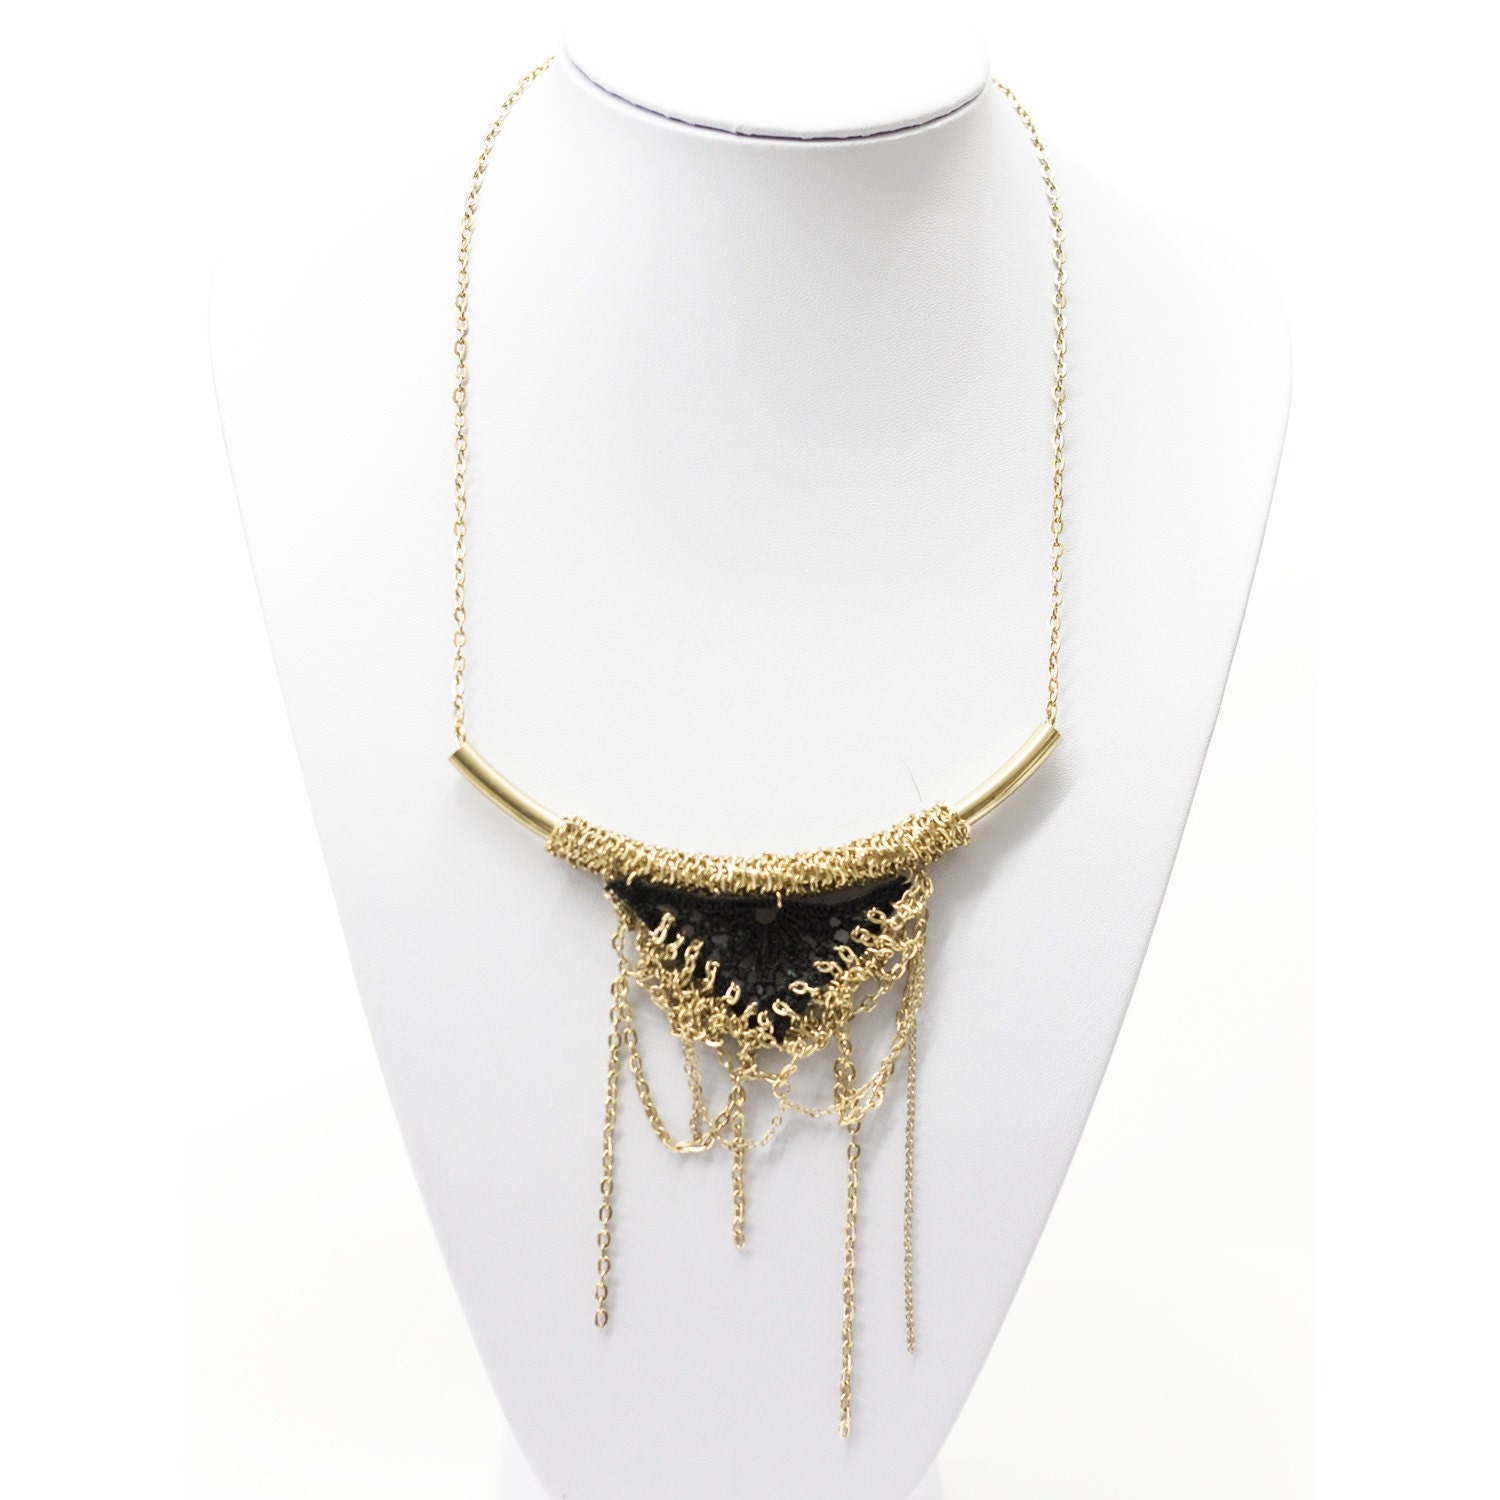 Lace necklace - Dripping triangle - Black and gold